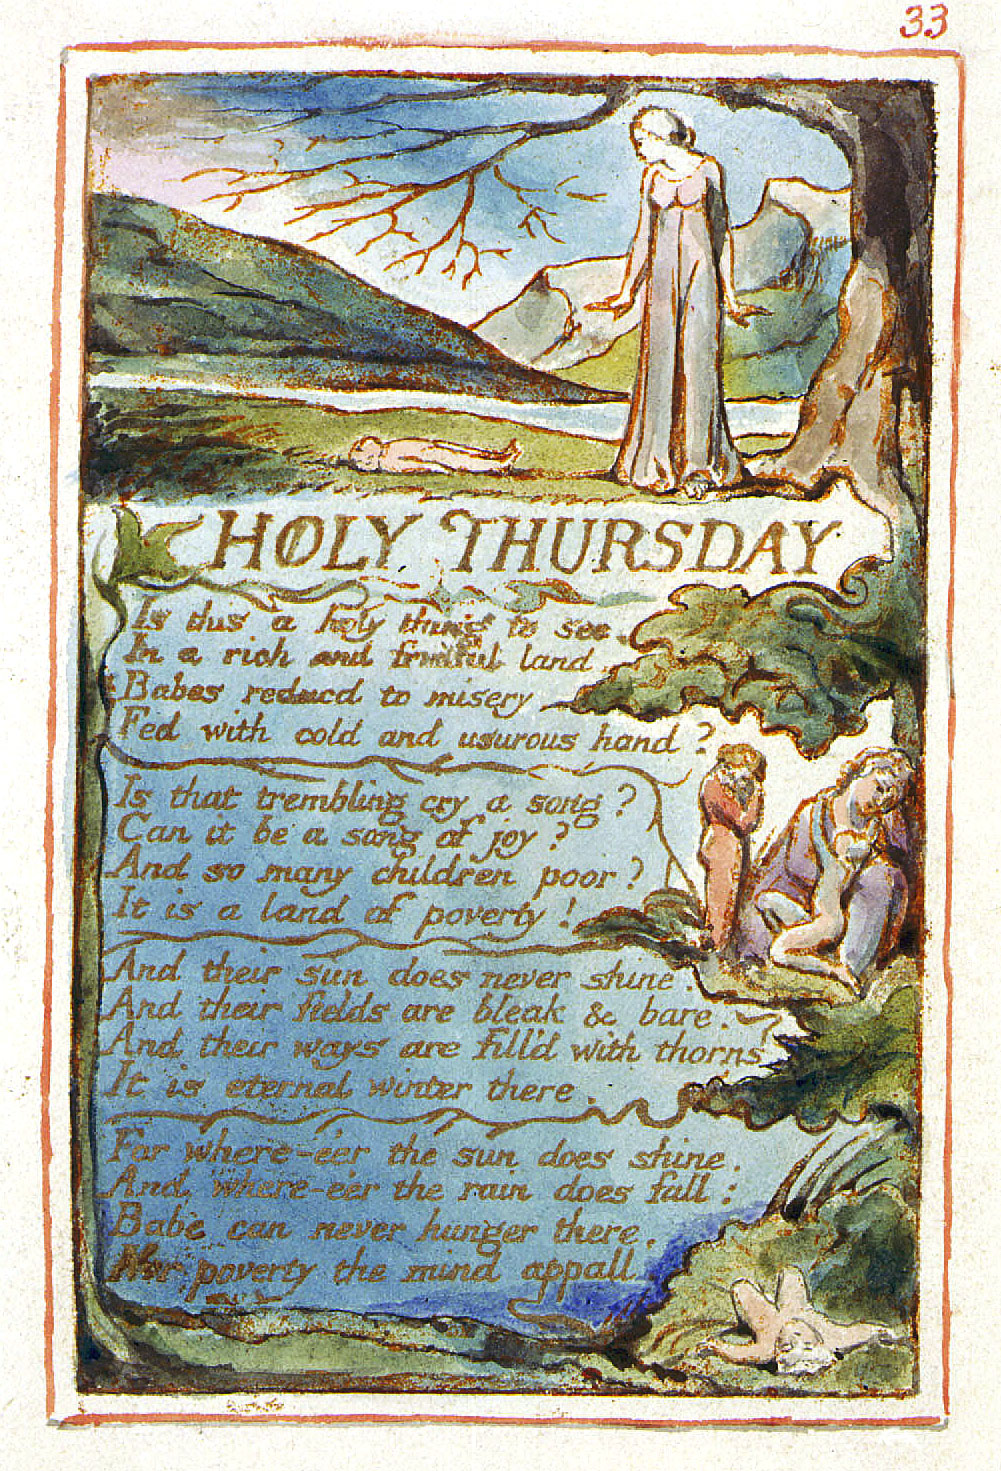 33
	HOLY THURSDAY
	Is this a holy thing to see,
	In a rich and fruitful land,
	Babes reducd to misery
	Fed with cold and usurous hand?
	Is that trembling cry a song?
	Can it be a song of joy?
	And so many children poor?
	It is a land of poverty!
	And their sun does never shine.
	And their fields are bleak & bare.
	And their ways are fill’d with thorns
	It is eternal winter there.
	For where-e’er the sun does shine.
	And where-e’er the rain does fall:
	Babe can never hunger there,
	Nor poverty the mind appall.